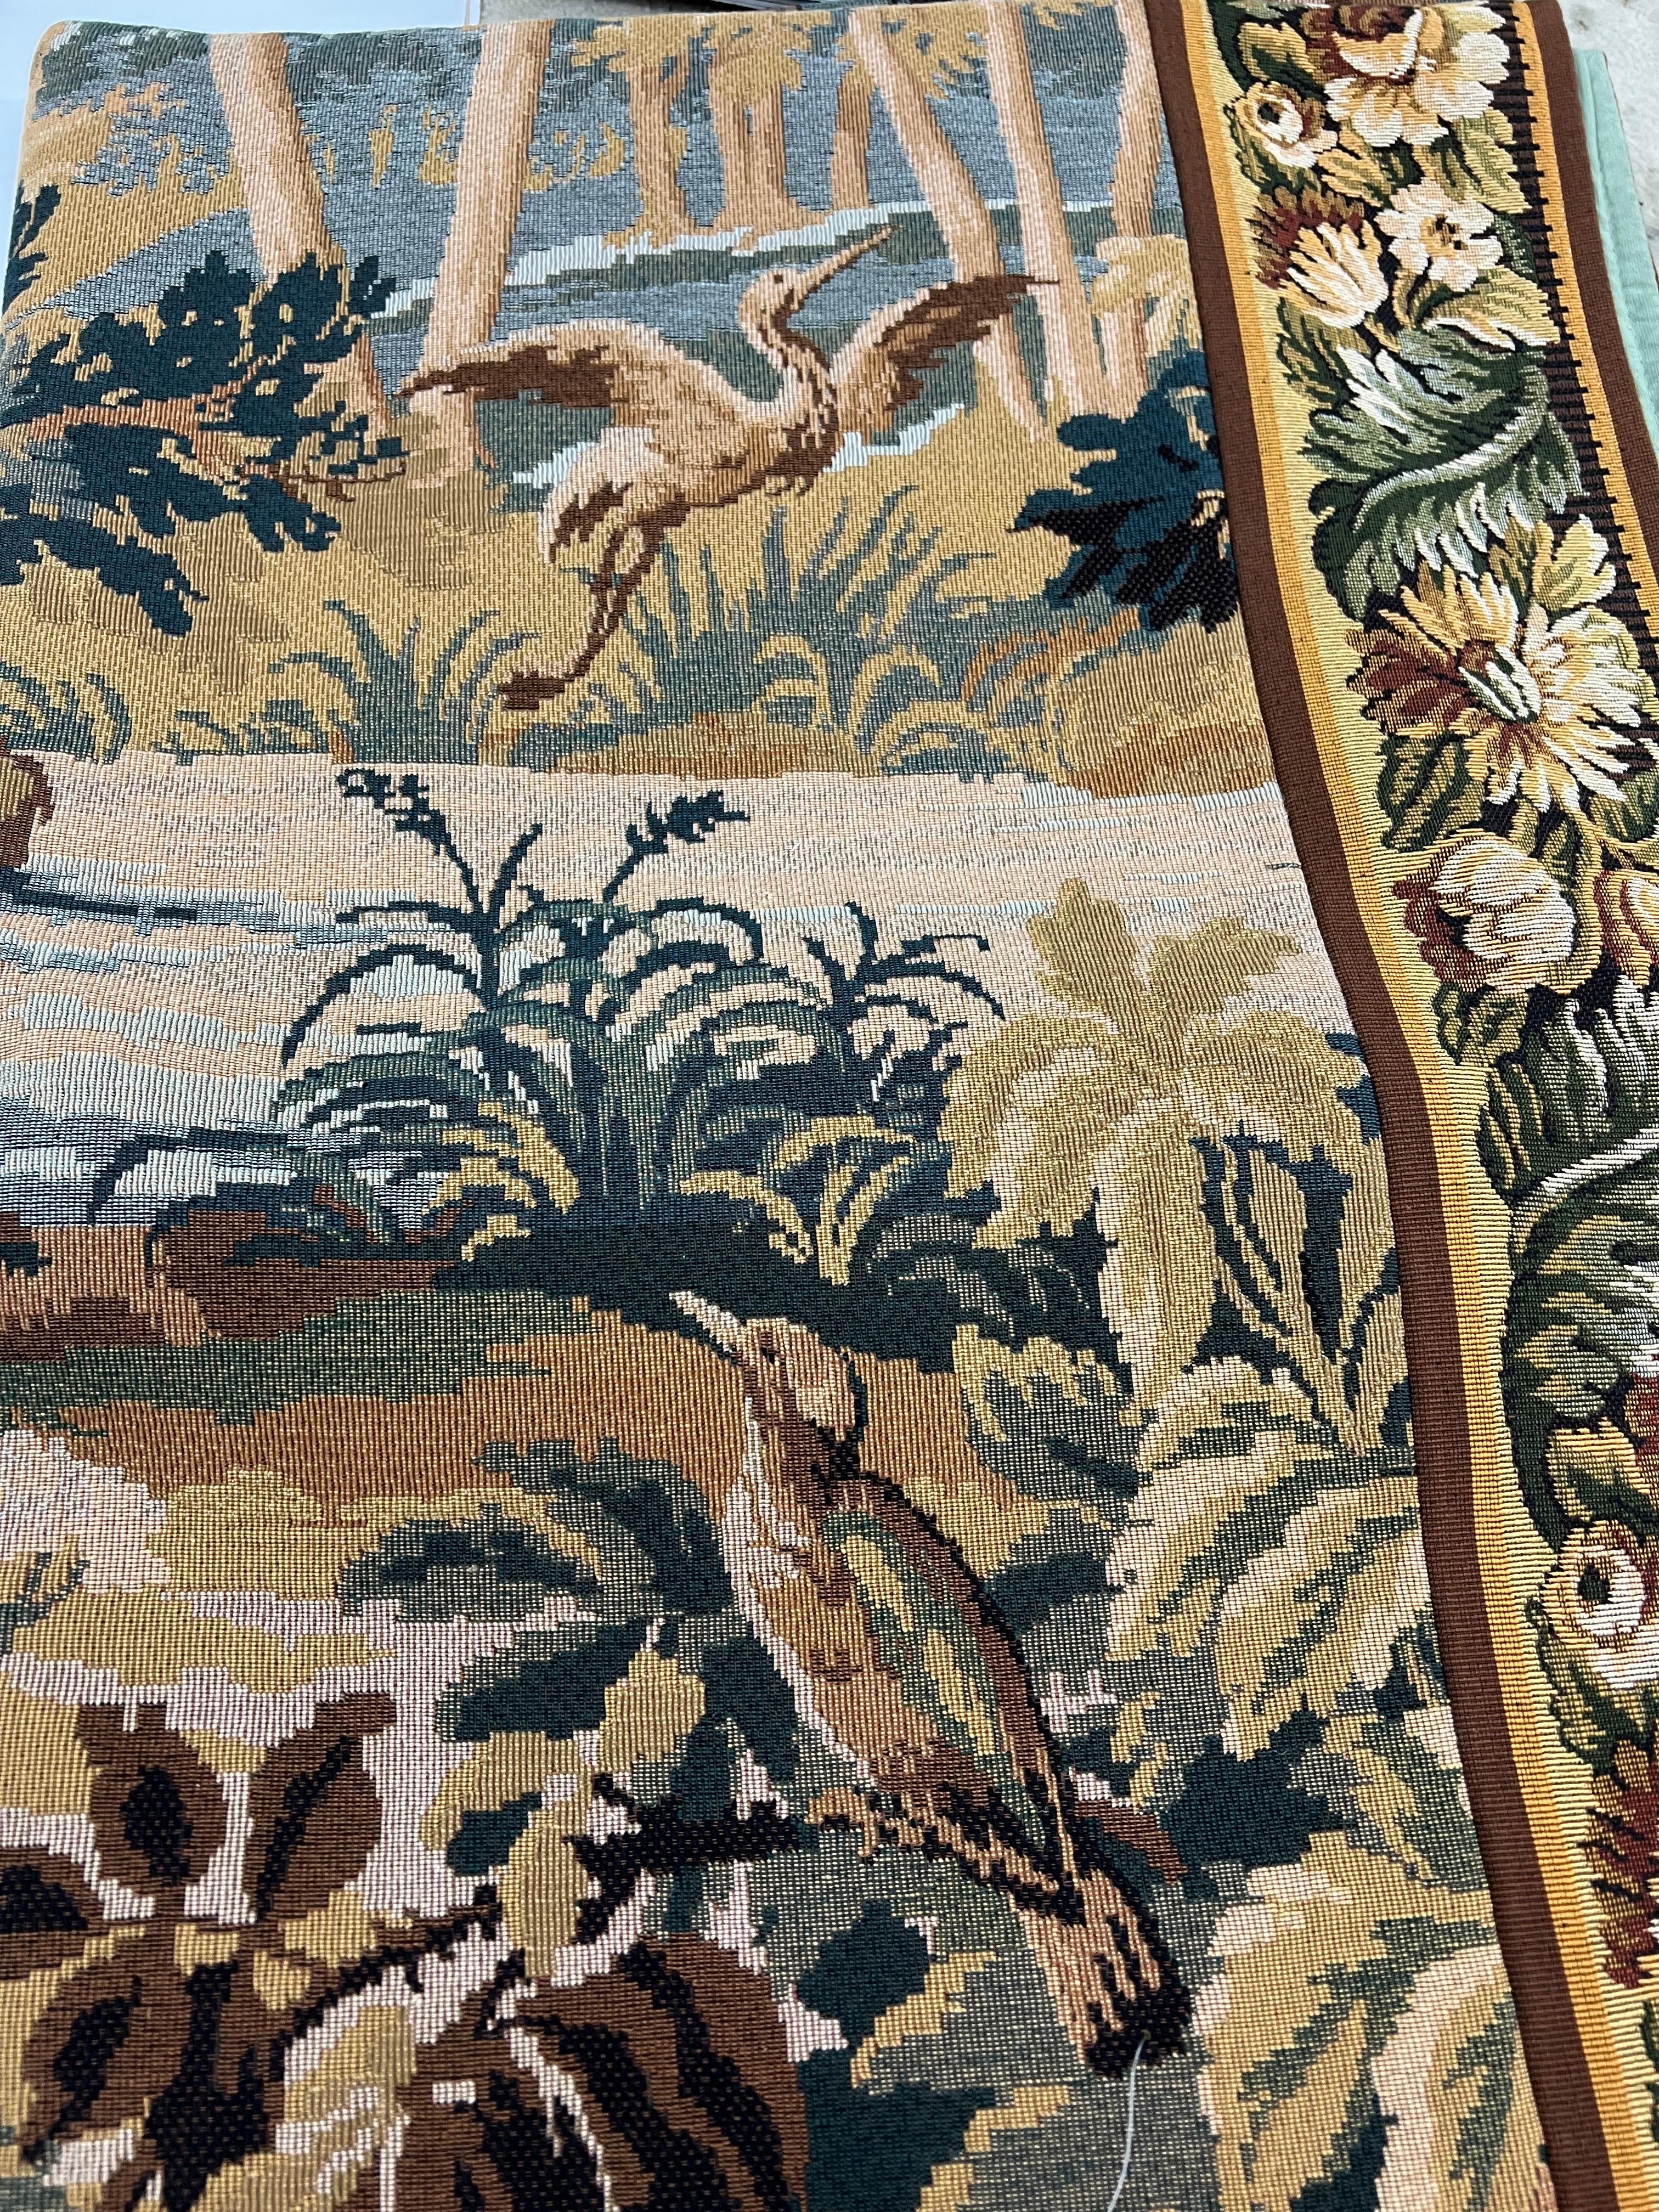 This tapestry is inspired from a fine example of a classical Verdure Tapestry, such as those woven in France, Brussels and Flanders during the 18th Century. Many Verdure Tapestries were woven throughout the 16th to 18th Centuries, with designs based